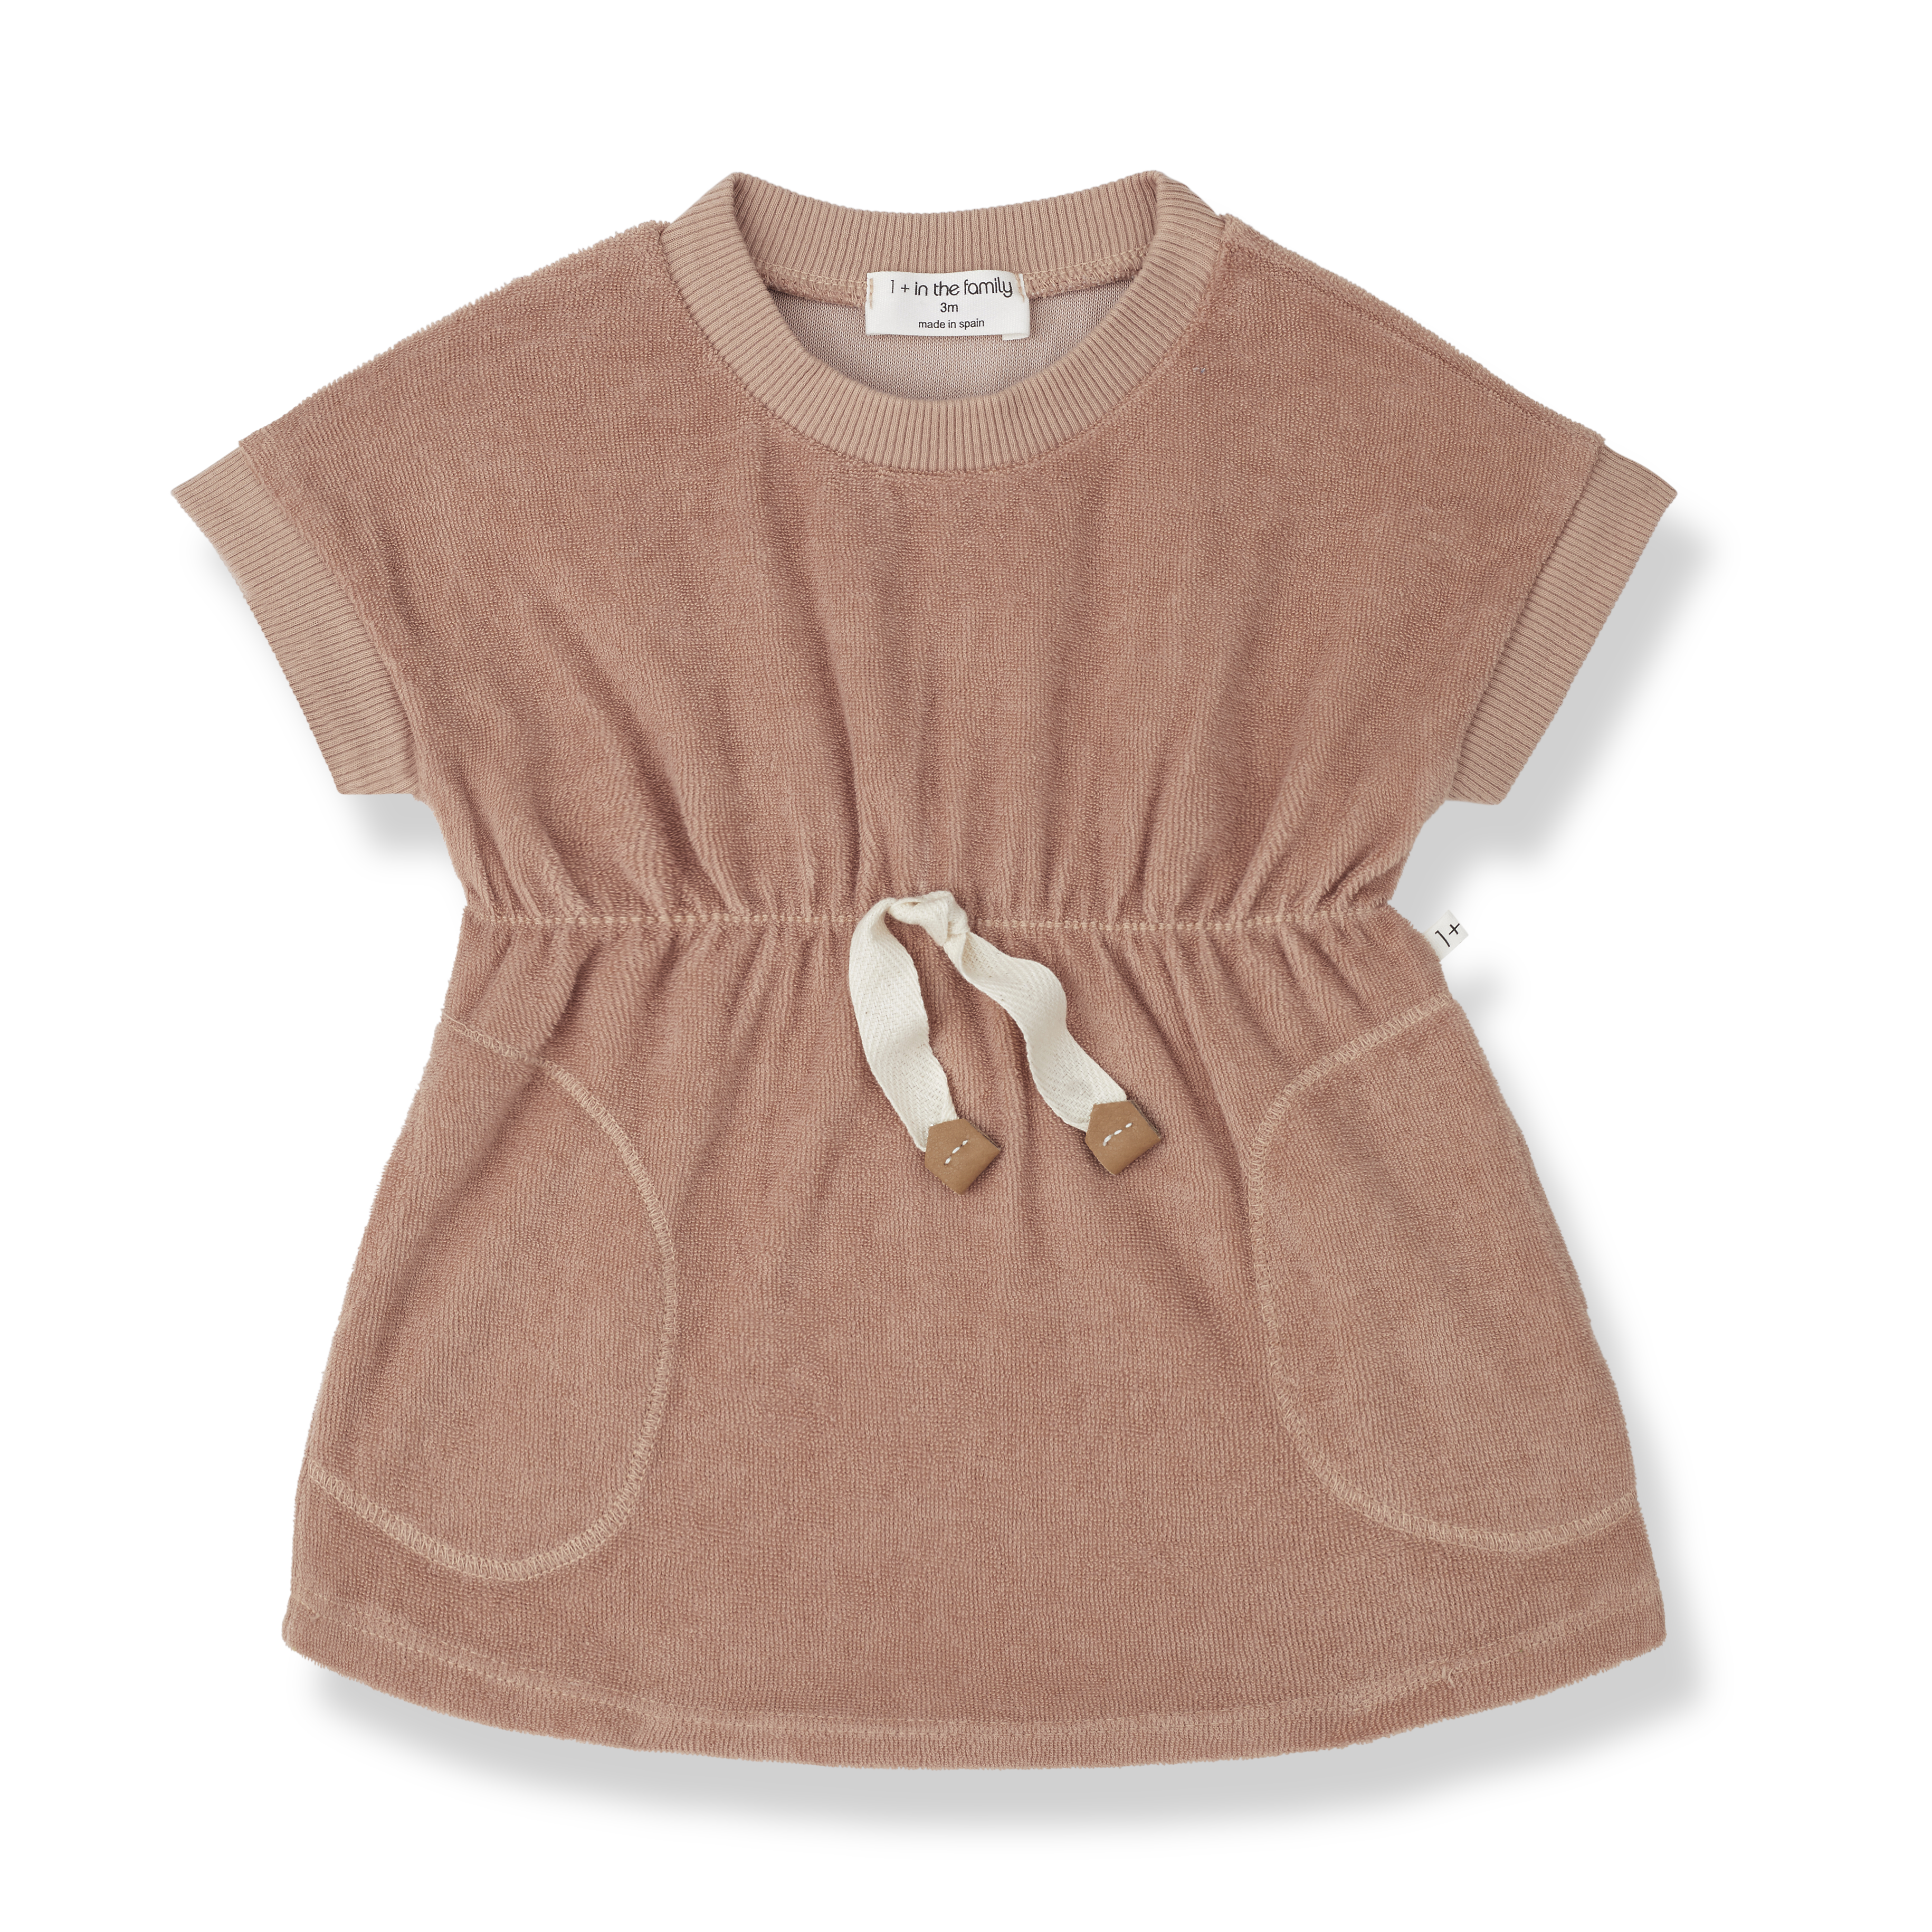 1+ in the family - vittoria - terry dress - apricot